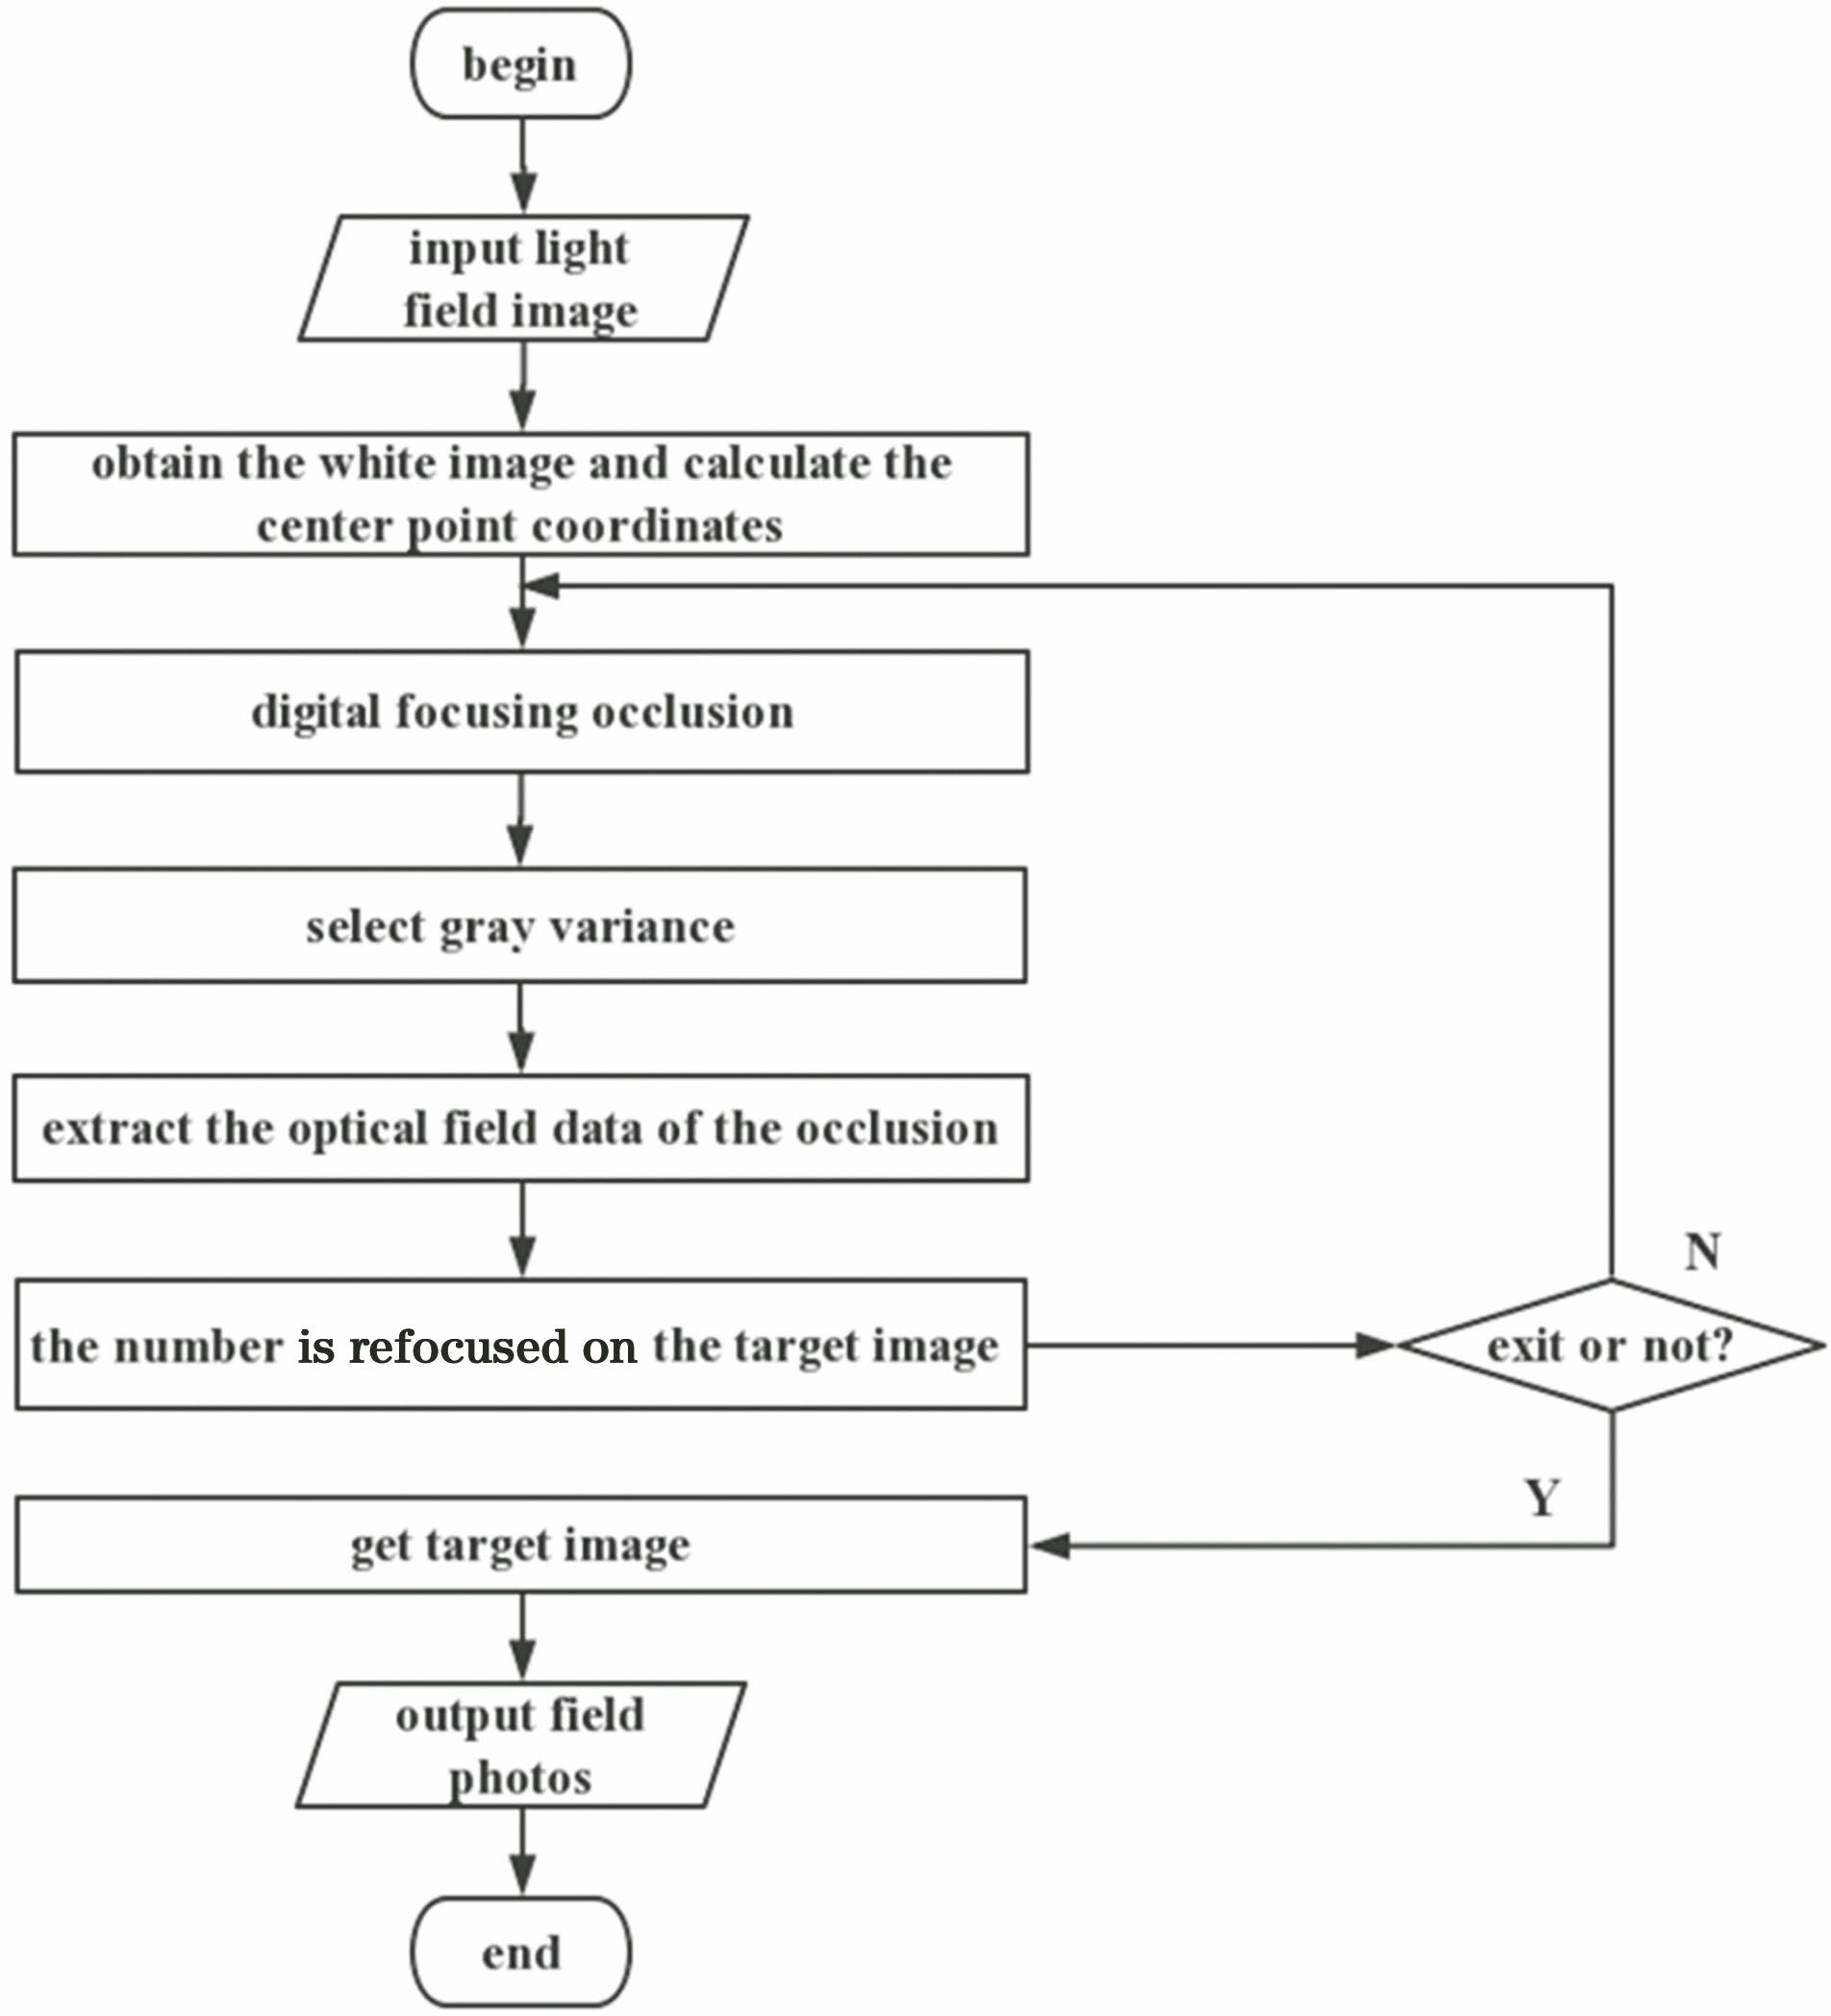 Flow chart of synthetic-aperture occlusion removal algorithm based on microlens array